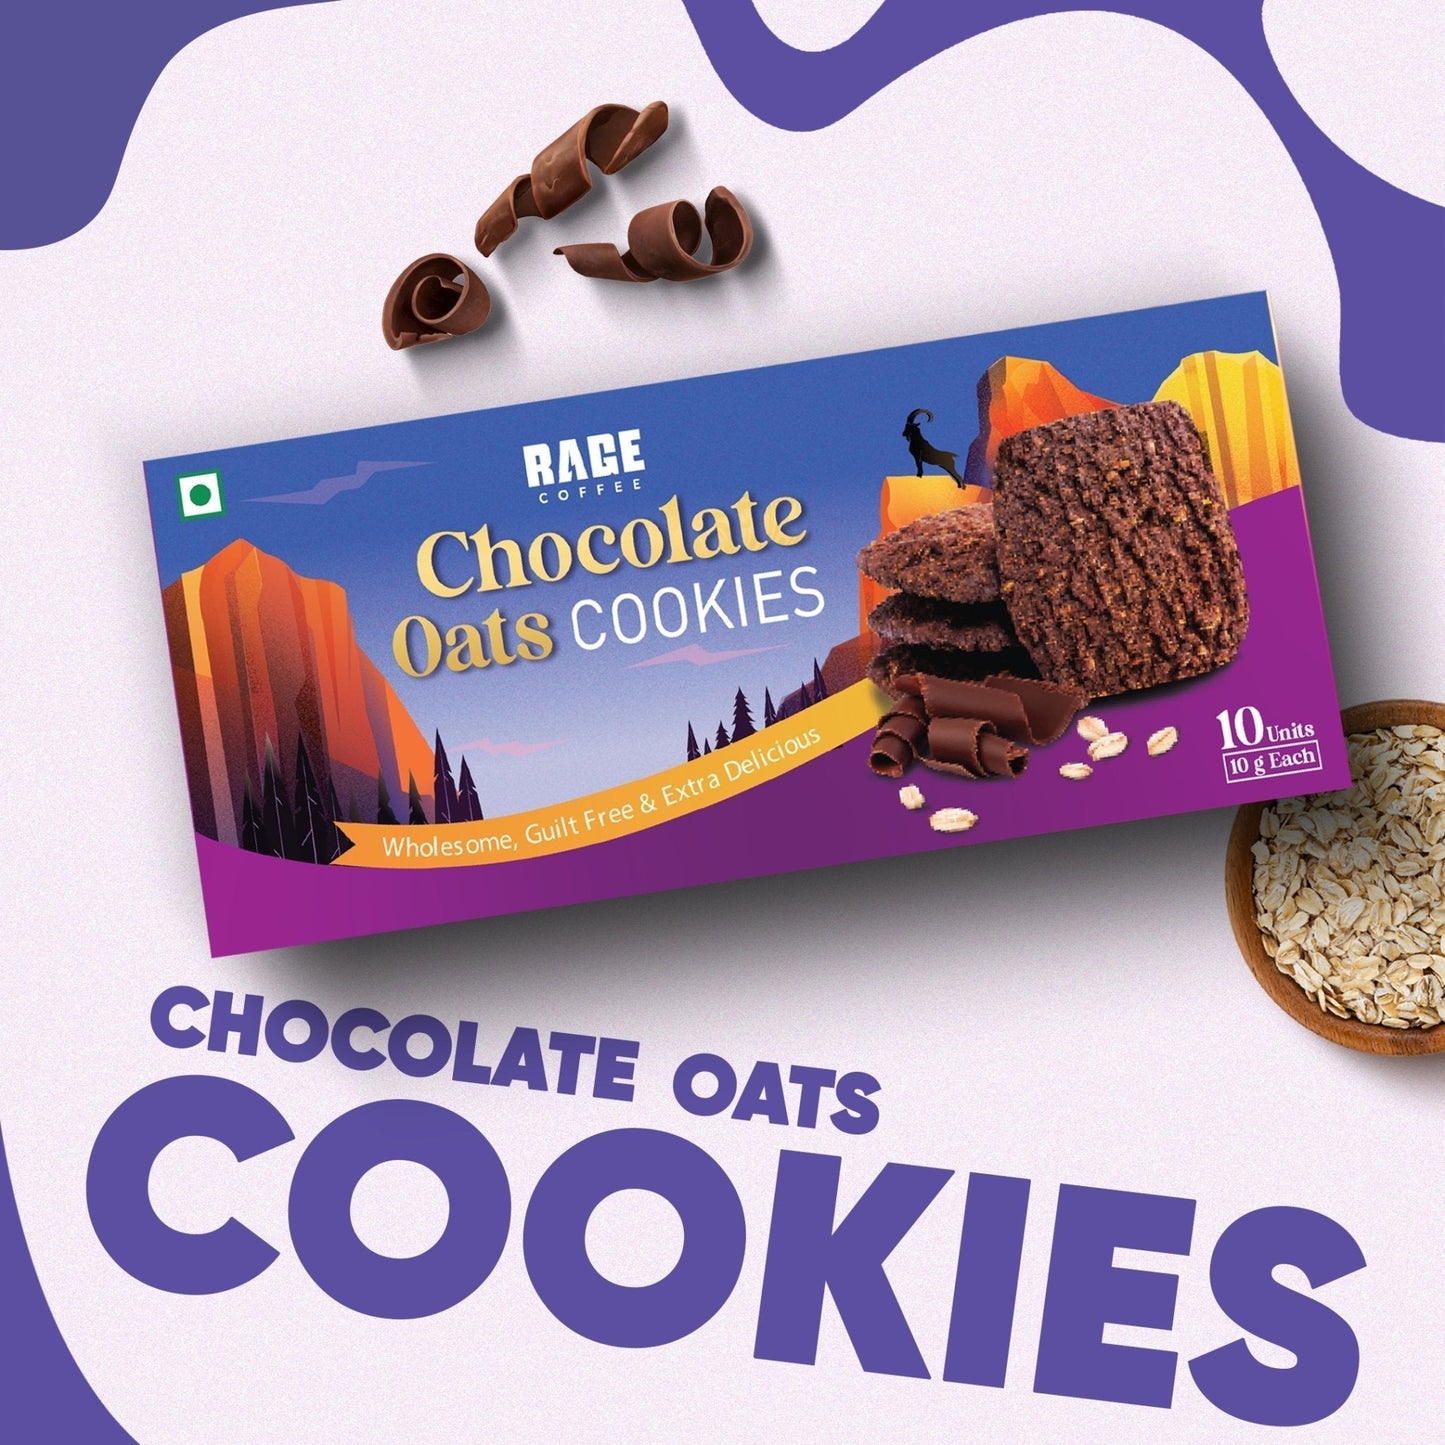 Chocolate Oats Cookies - Pack of 1 (10 g x 10 cookies)